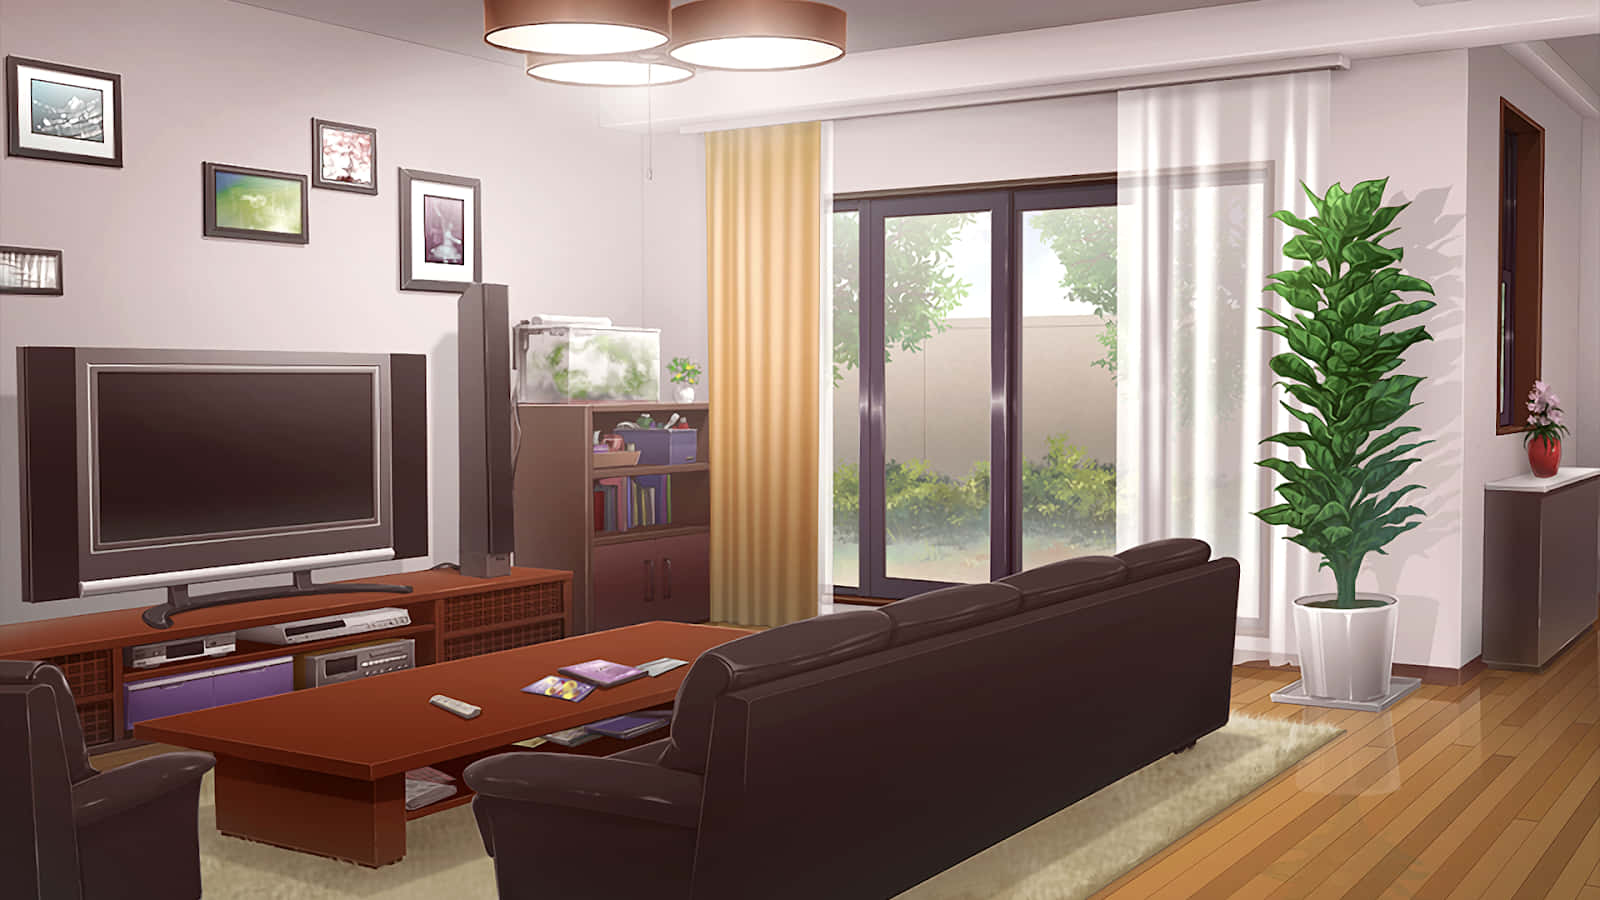 "Relax in the comfort of this anime-themed living room!"